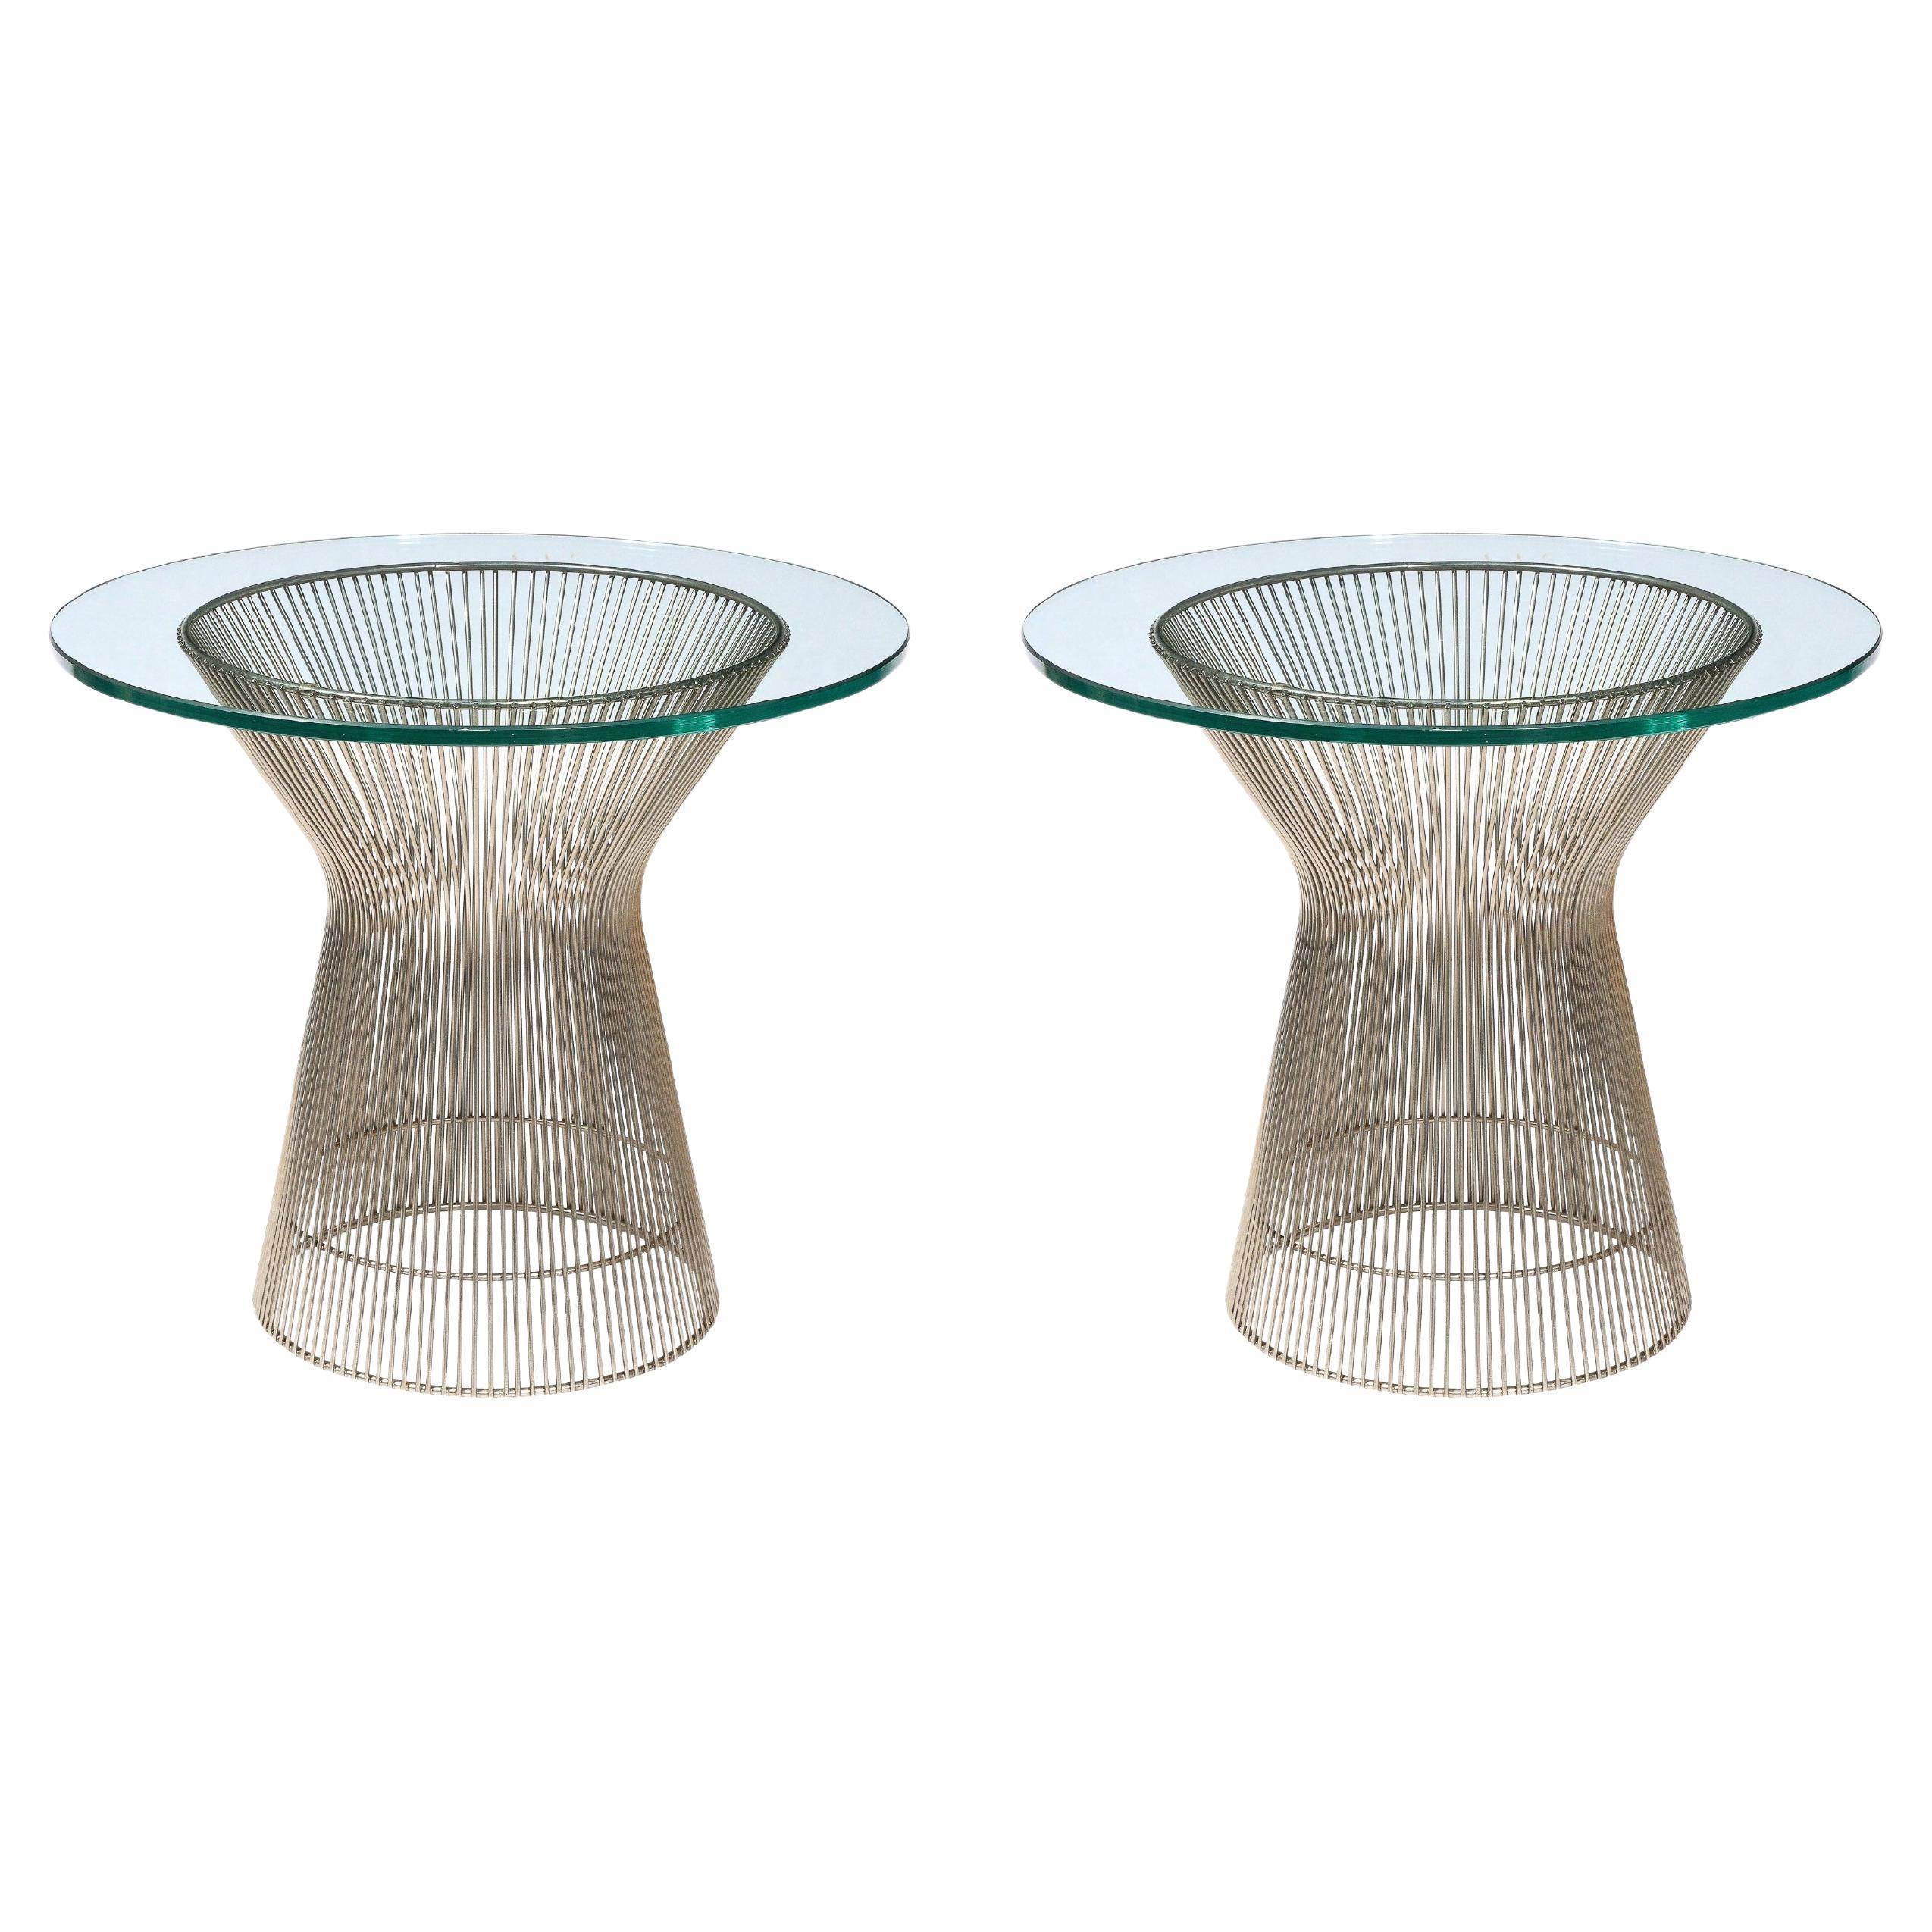 Pair of Mid-Century Modernist Polished Nickel Side Tables by Warren Platner For Sale